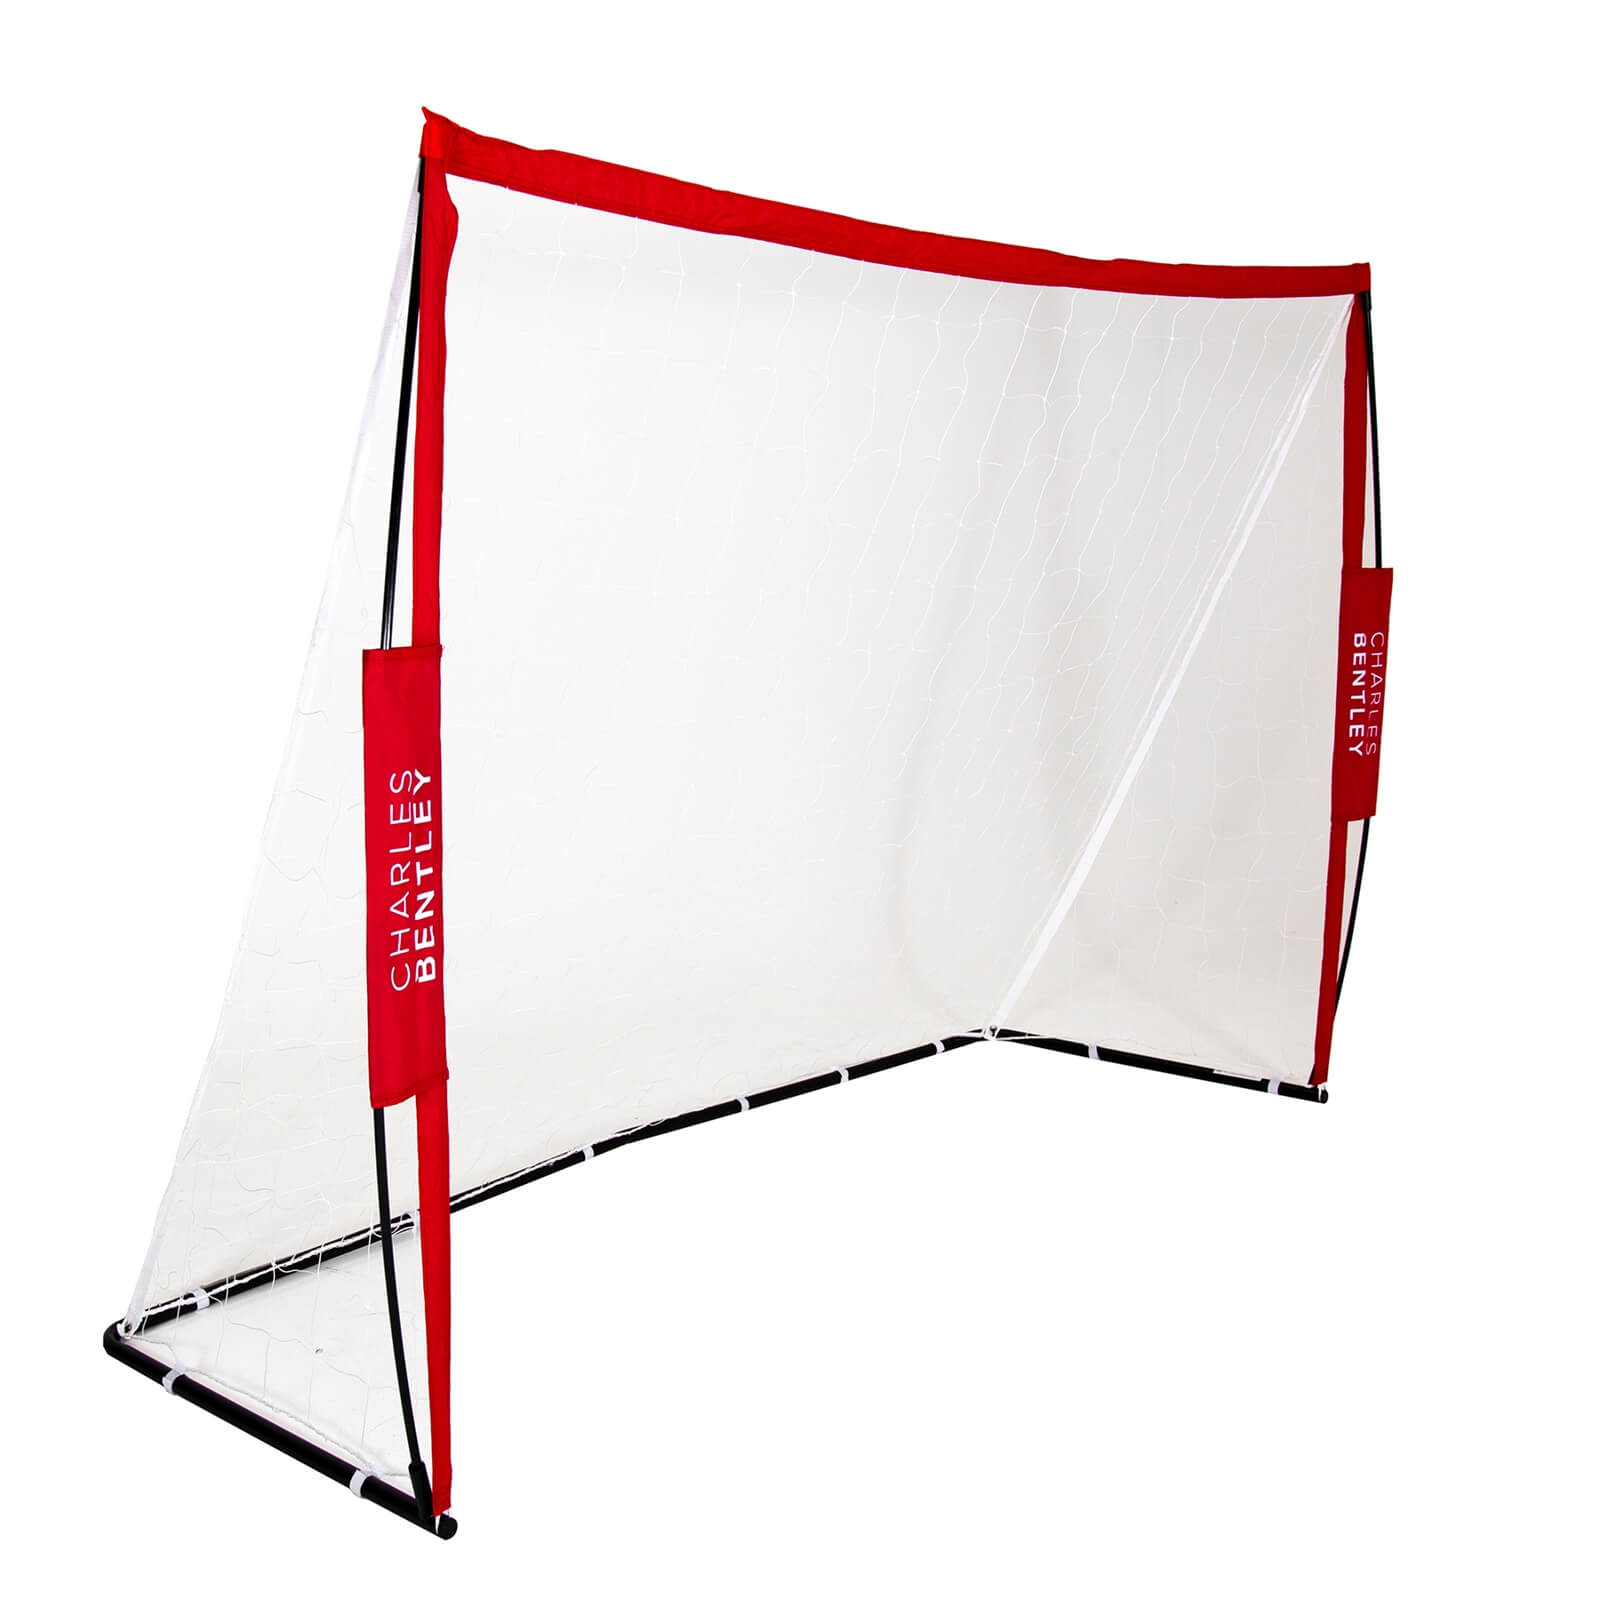 Charles Bentley 7x5ft PortableTraining Goal with Cary Bag